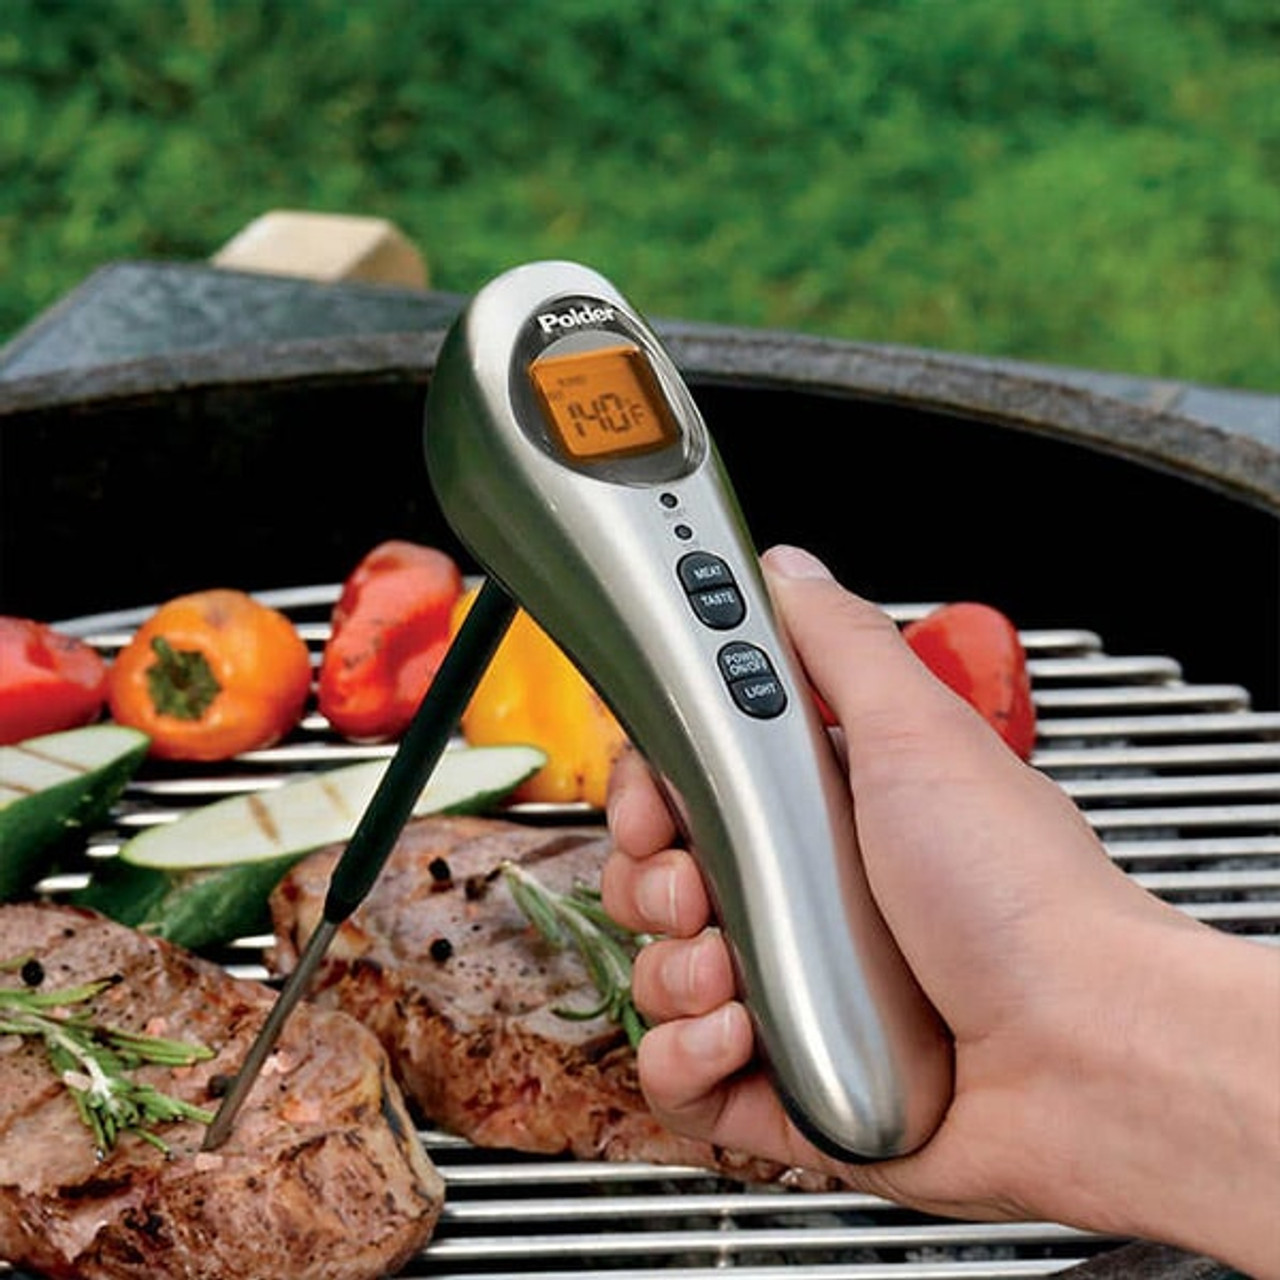 https://cdn11.bigcommerce.com/s-vgxtu5v35e/images/stencil/1280x1280/products/1719/3266/Polder-Deluxe-Safe-Serve-Instant-Read-Thermometer-2__37774.1663549166.jpg?c=1